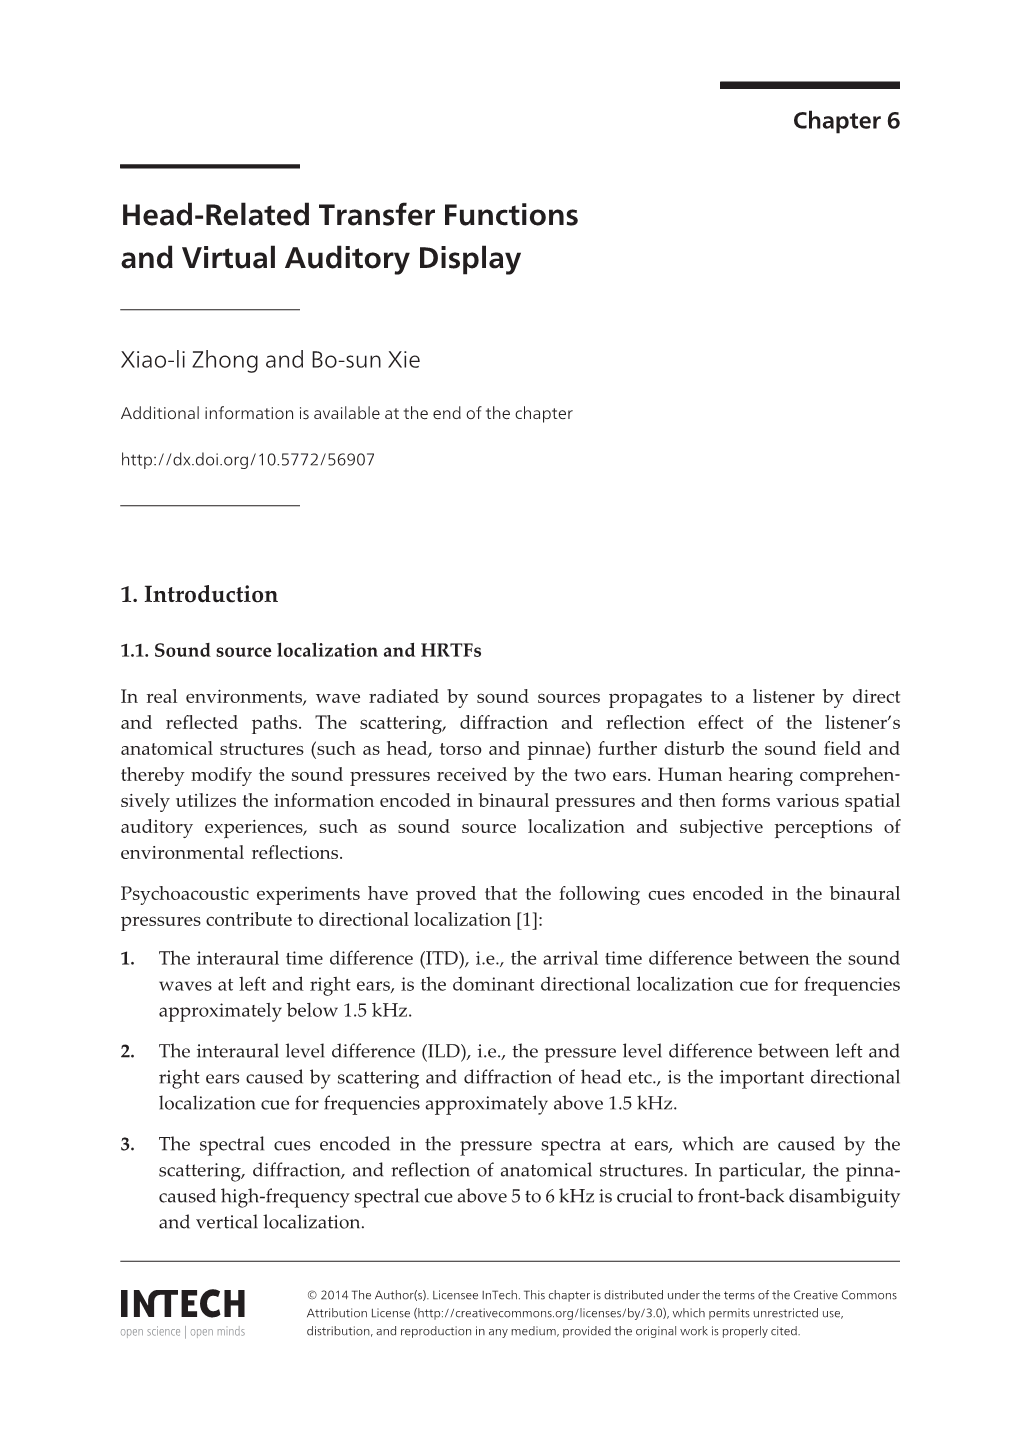 Head-Related Transfer Functions and Virtual Auditory Display